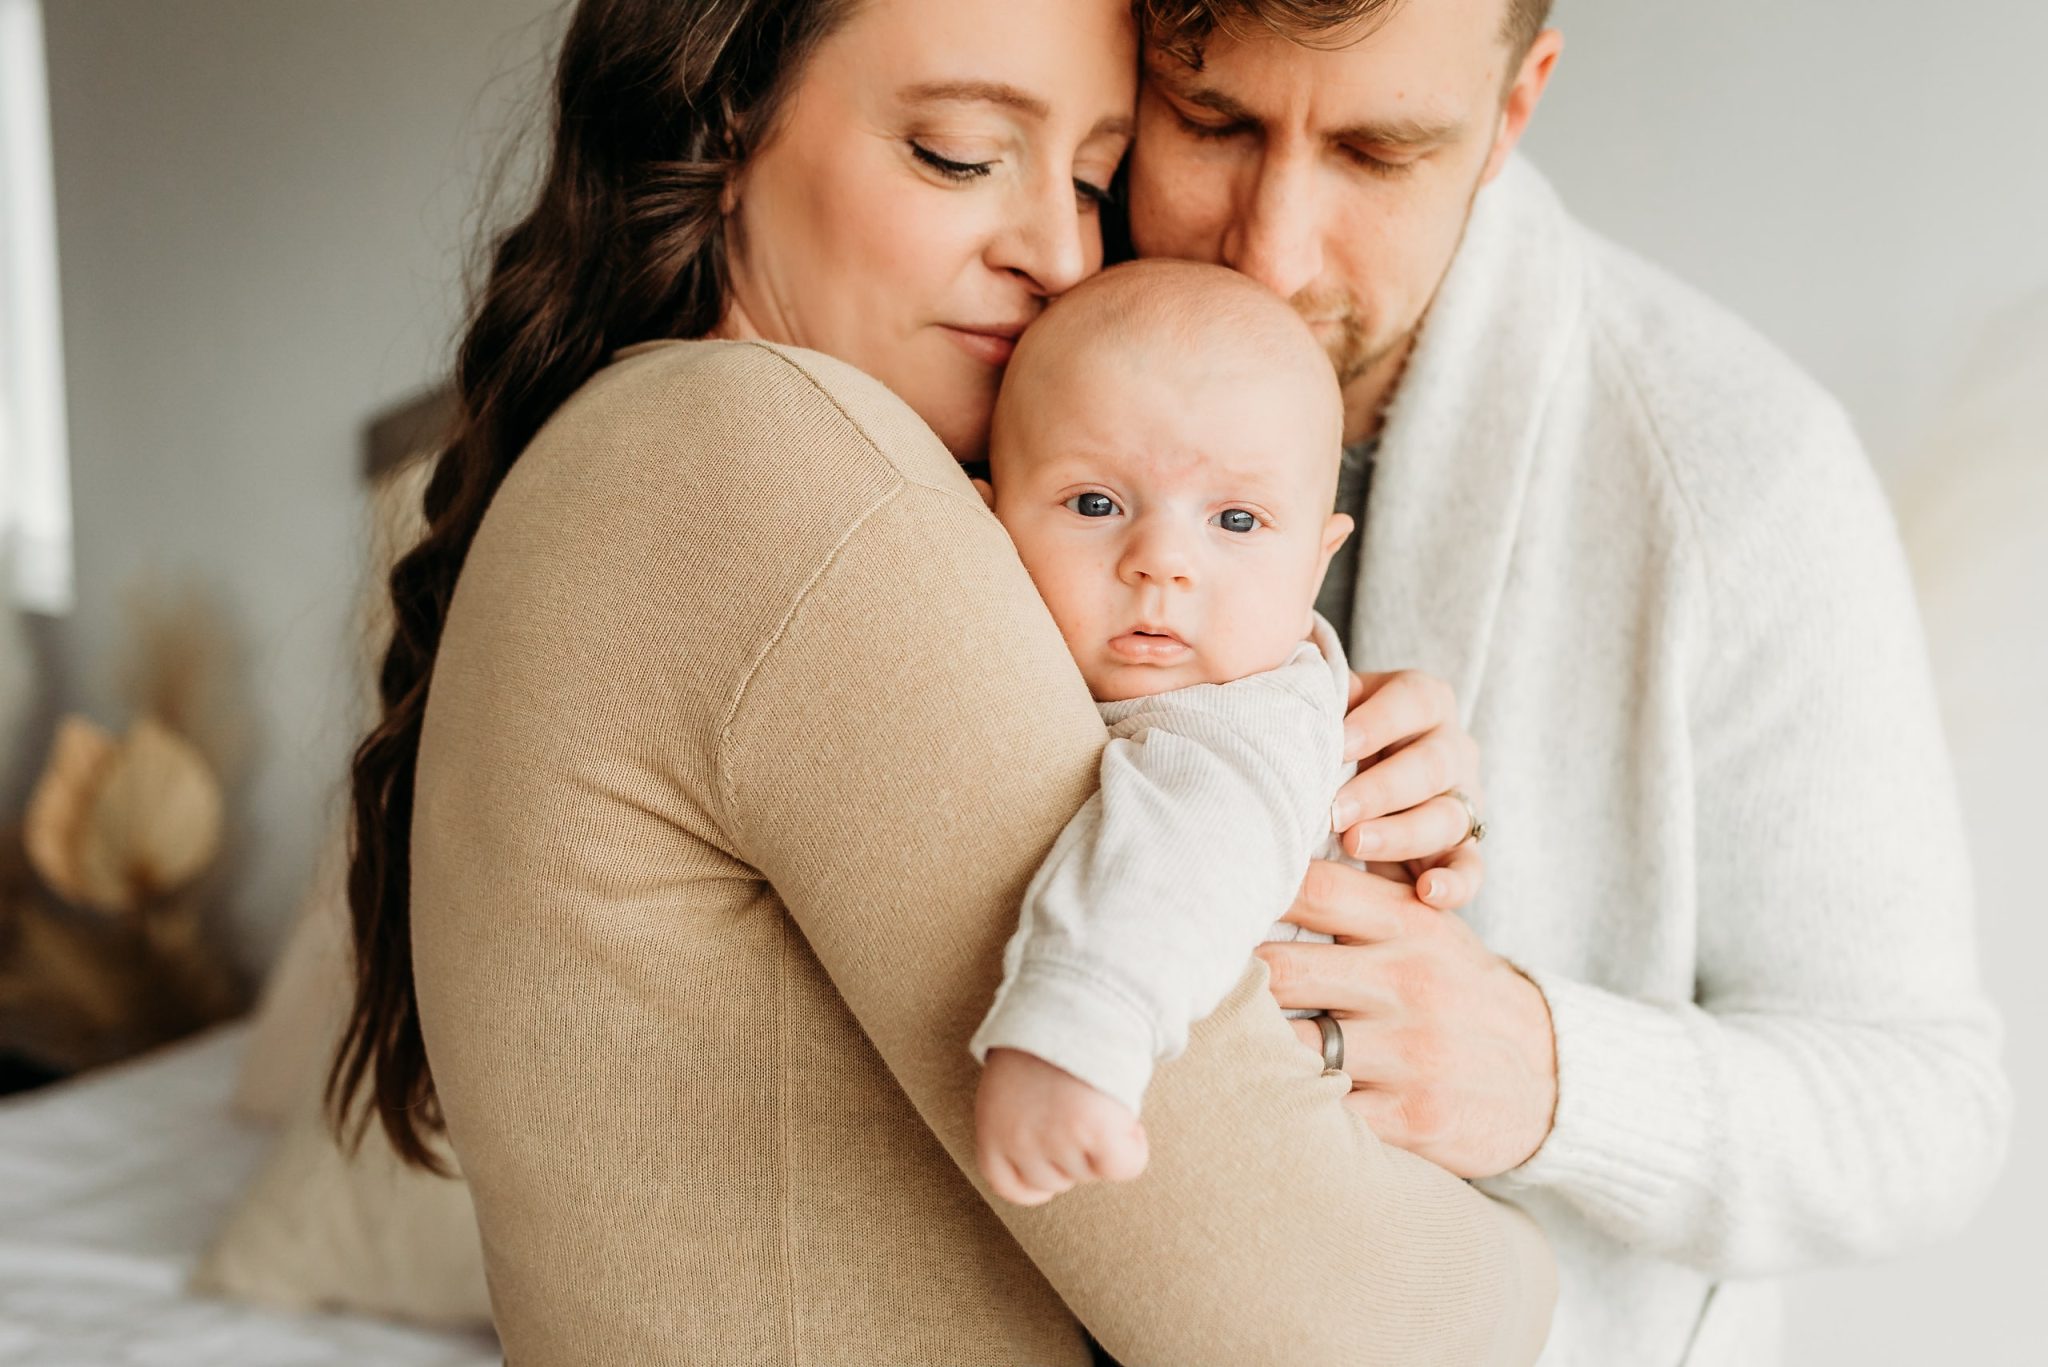 when is the best time to take newborn photos?